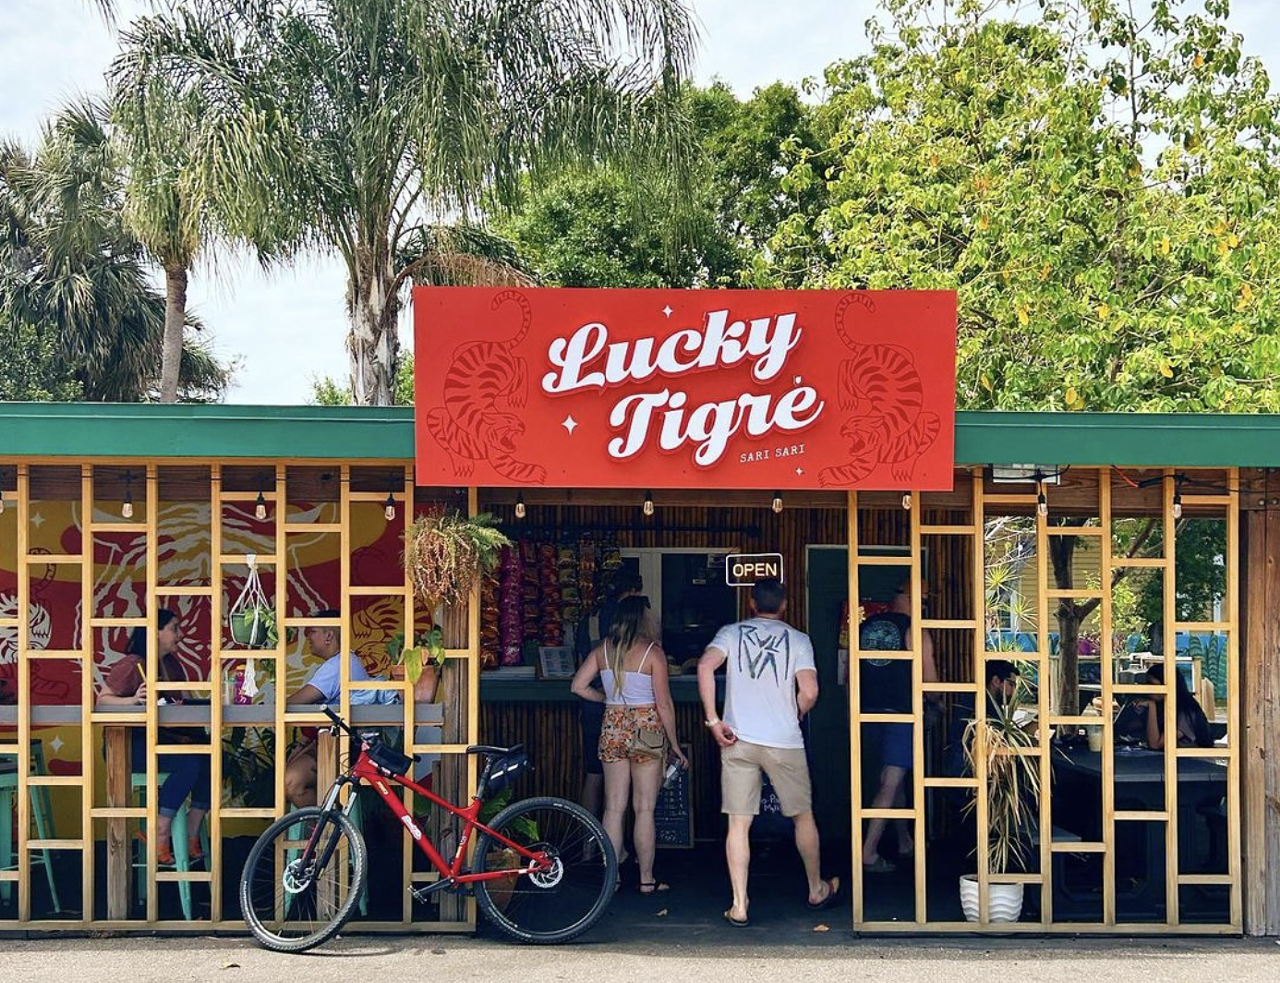 Lucky Tigre
1101 S Howard Ave. Suite B, Tampa
This sari sari-inspired walk-up concept has occupied its little SoHo parcel for about a year now, and it’s definitely South Tampa’s go-to spot for Filipino-American dumplings, bao buns, milk tea and lumpia. It’s also probably the only place in all of Tampa Bay where you’ll be able to find vegan and dairy-free halo halo, complete with homemade ube ice cream. Owner and Tampa native Julie Michelle Sainte Feliciano plans to open a larger, full-service version of Lucky Tigre in West Tampa. 
Photo via theluckytigre/Instagram